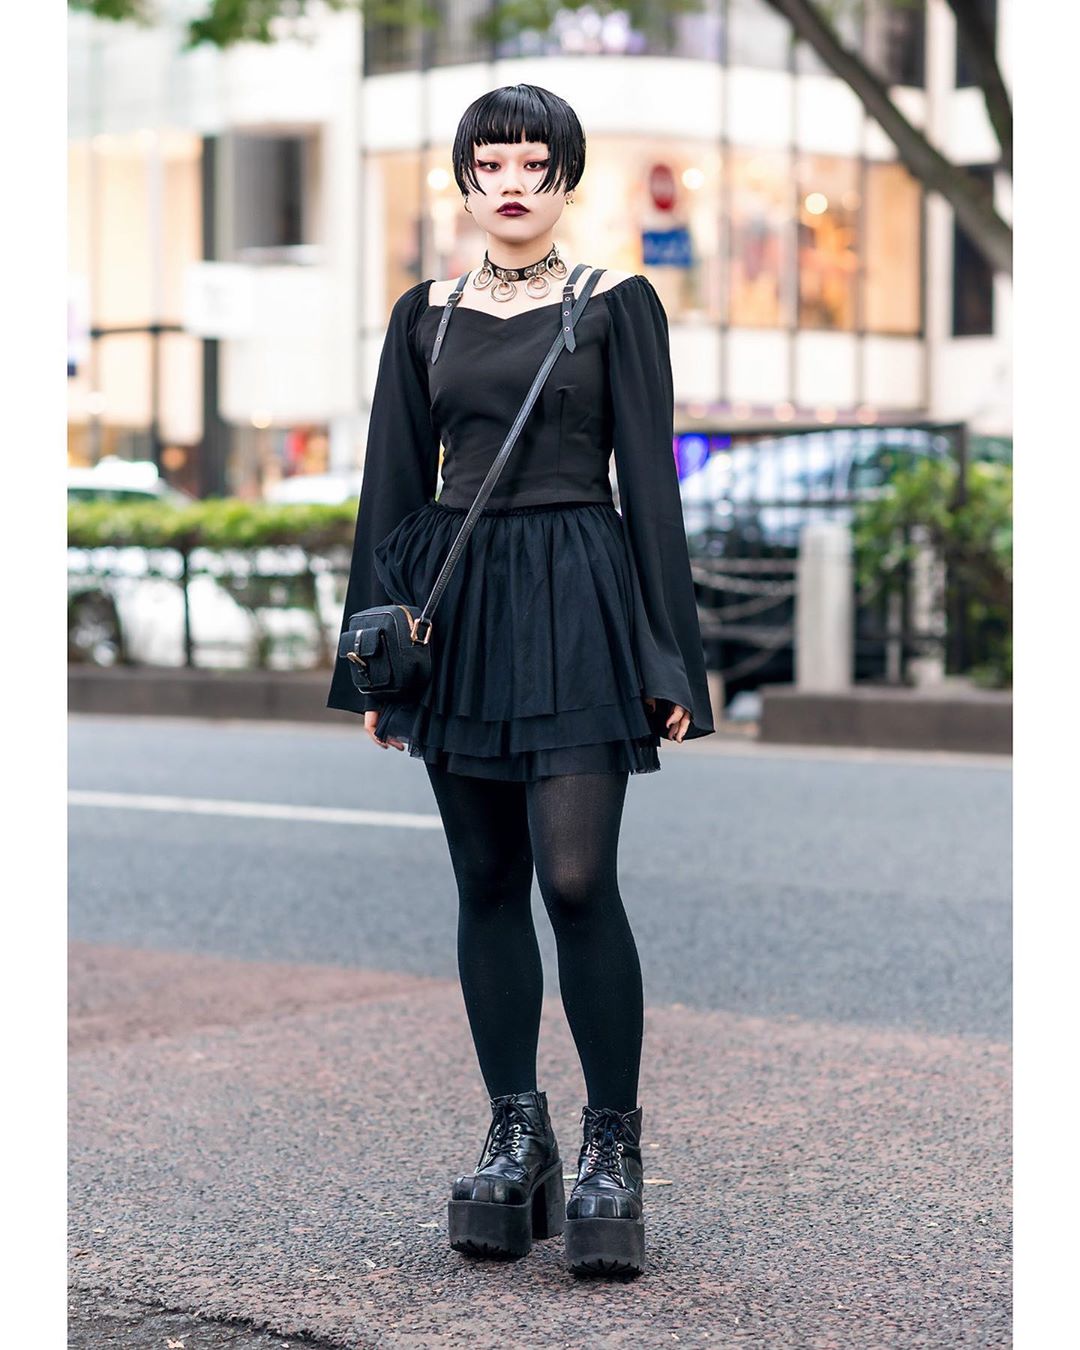 Tokyo Fashion: 19-year-old Japanese student Hana on the street in ...